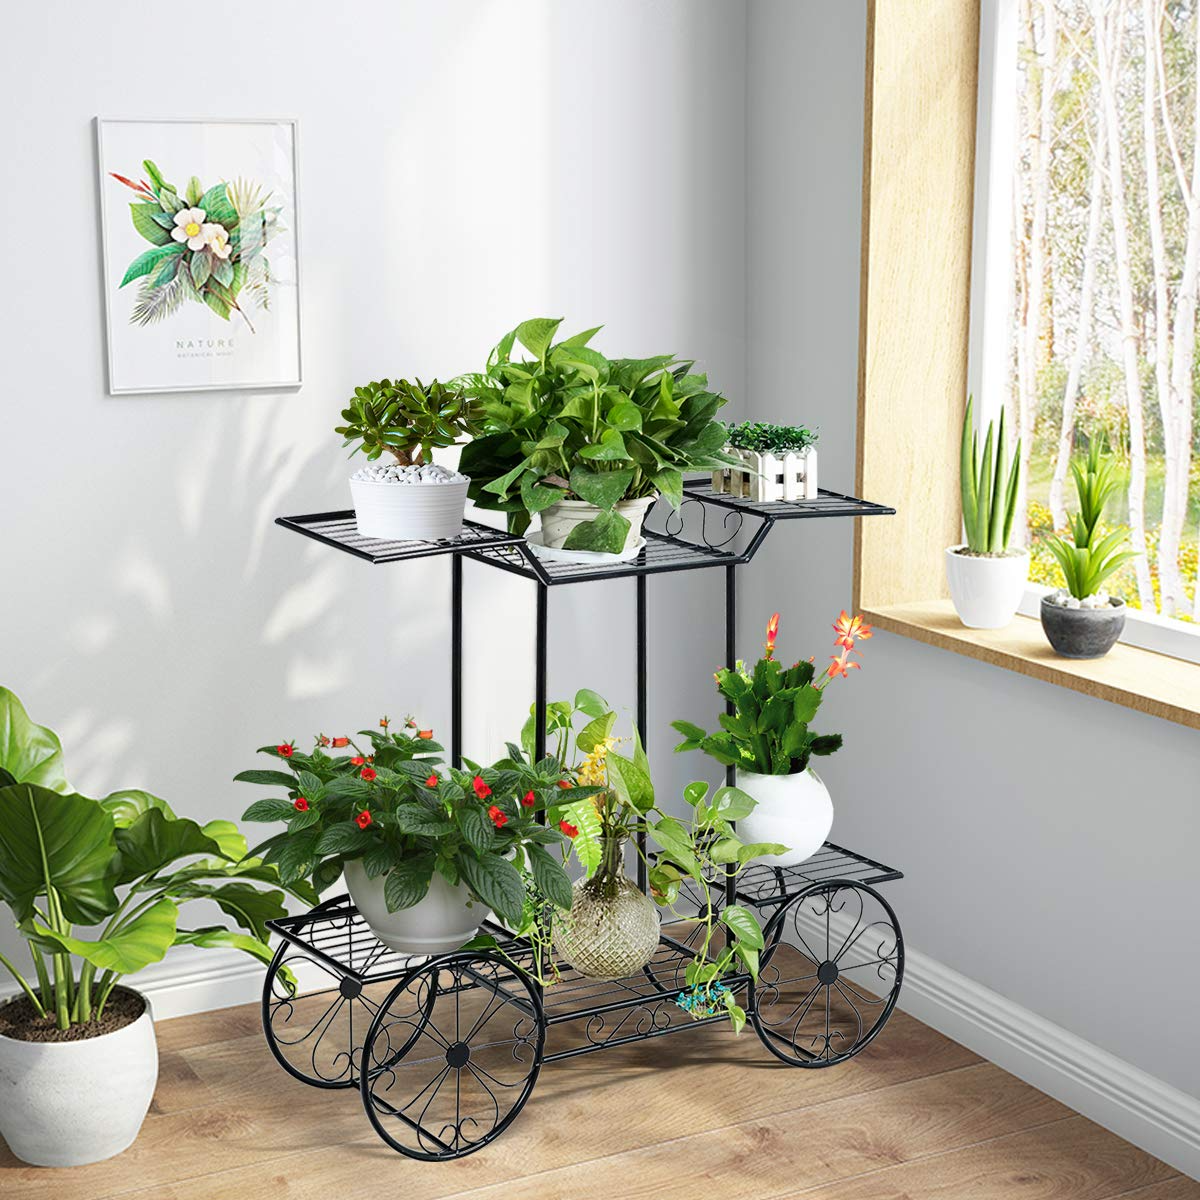 Giantex Garden Cart Metal Plant Stand with 4 Decorative Wheels